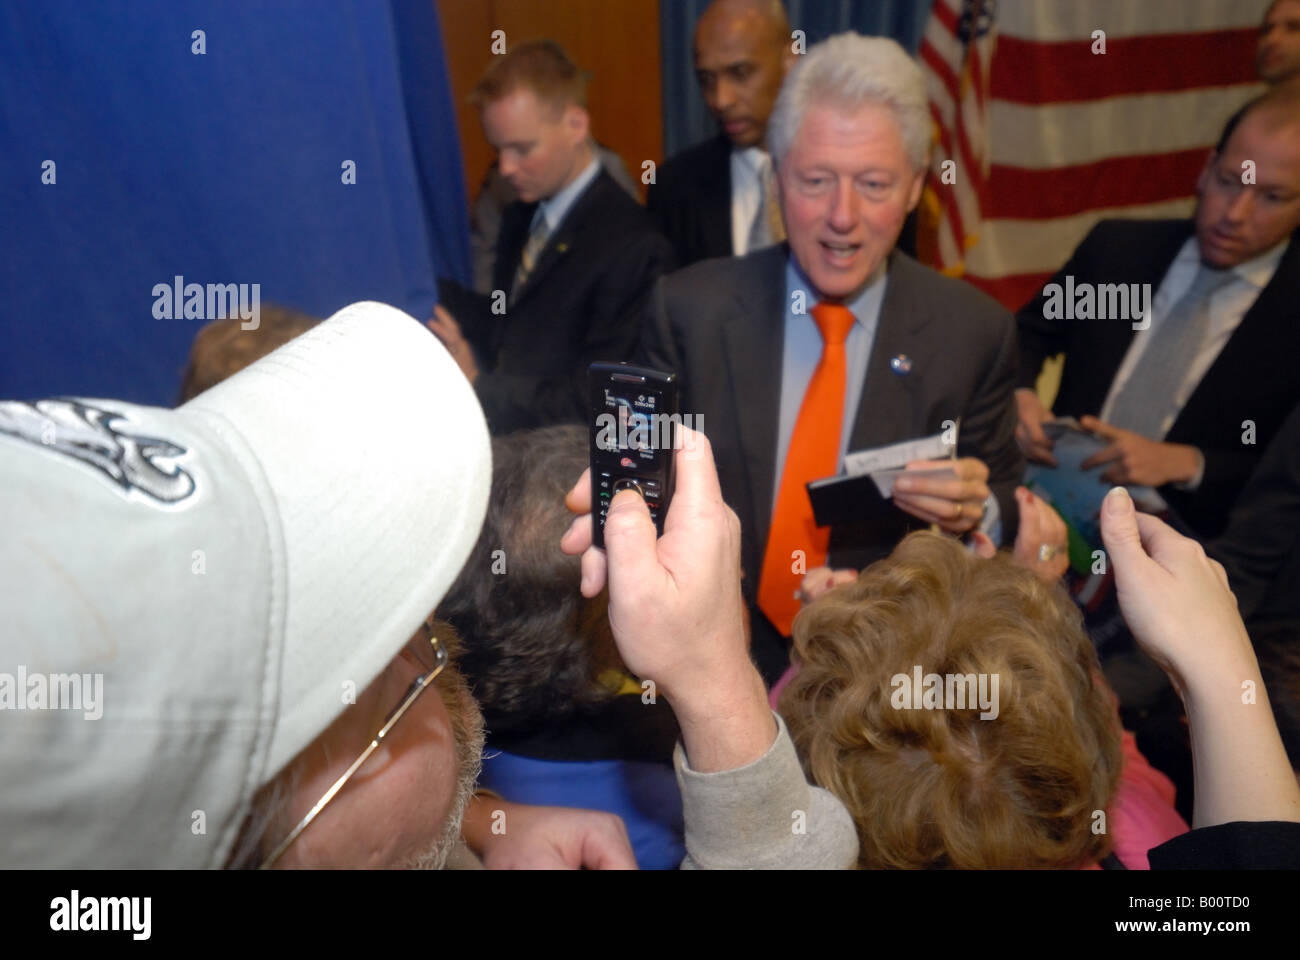 Bill Clinton greets voters at a speaking engagement. Stock Photo